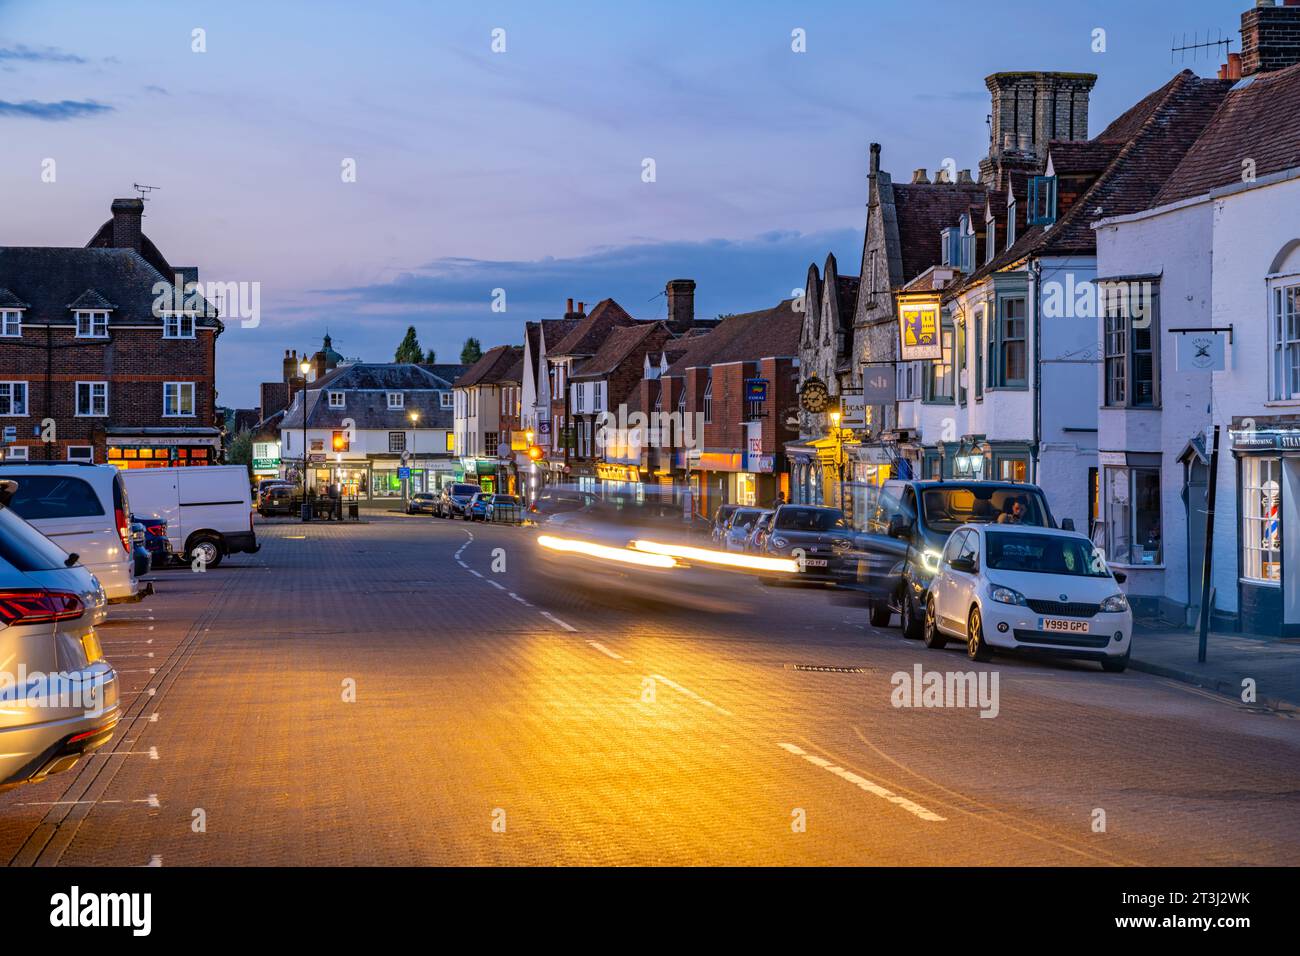 The high street of Widest Malling on a summers evening Stock Photo